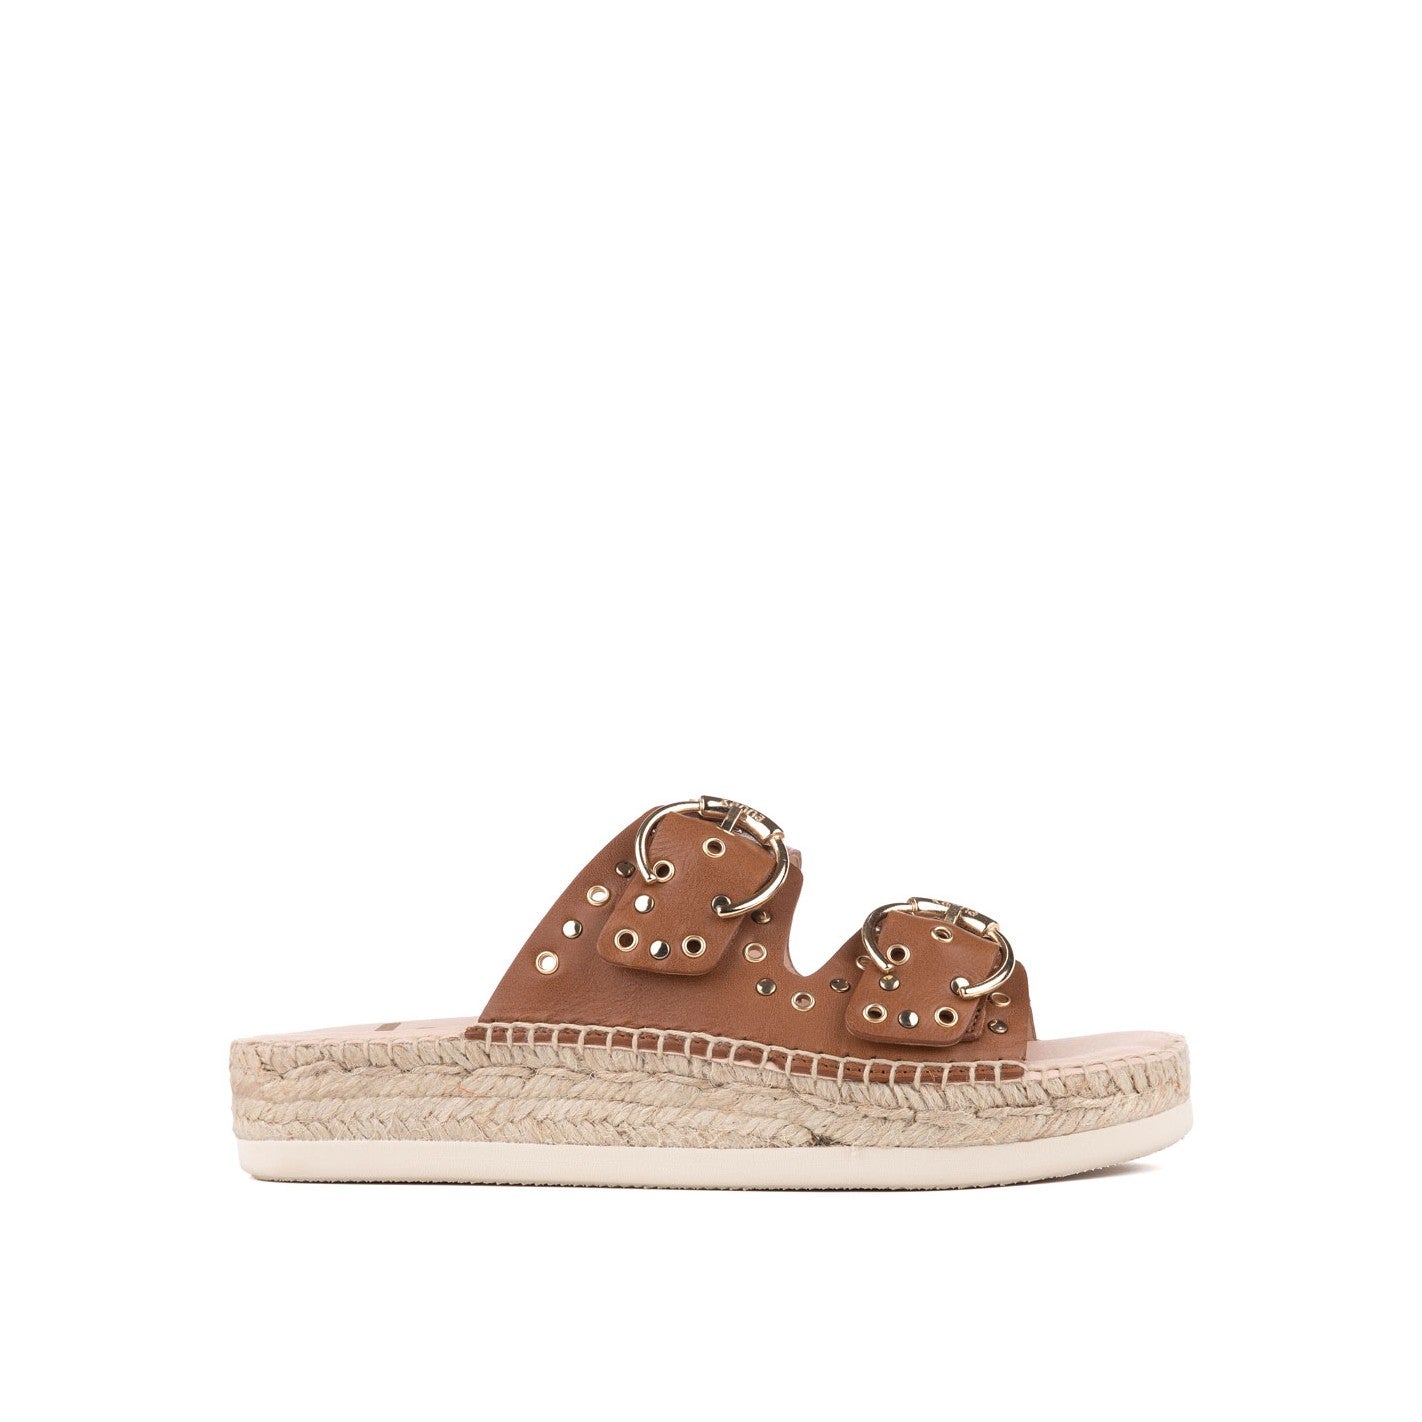 KANNA POP SANDAL IN BROWN WITH SEQUINS